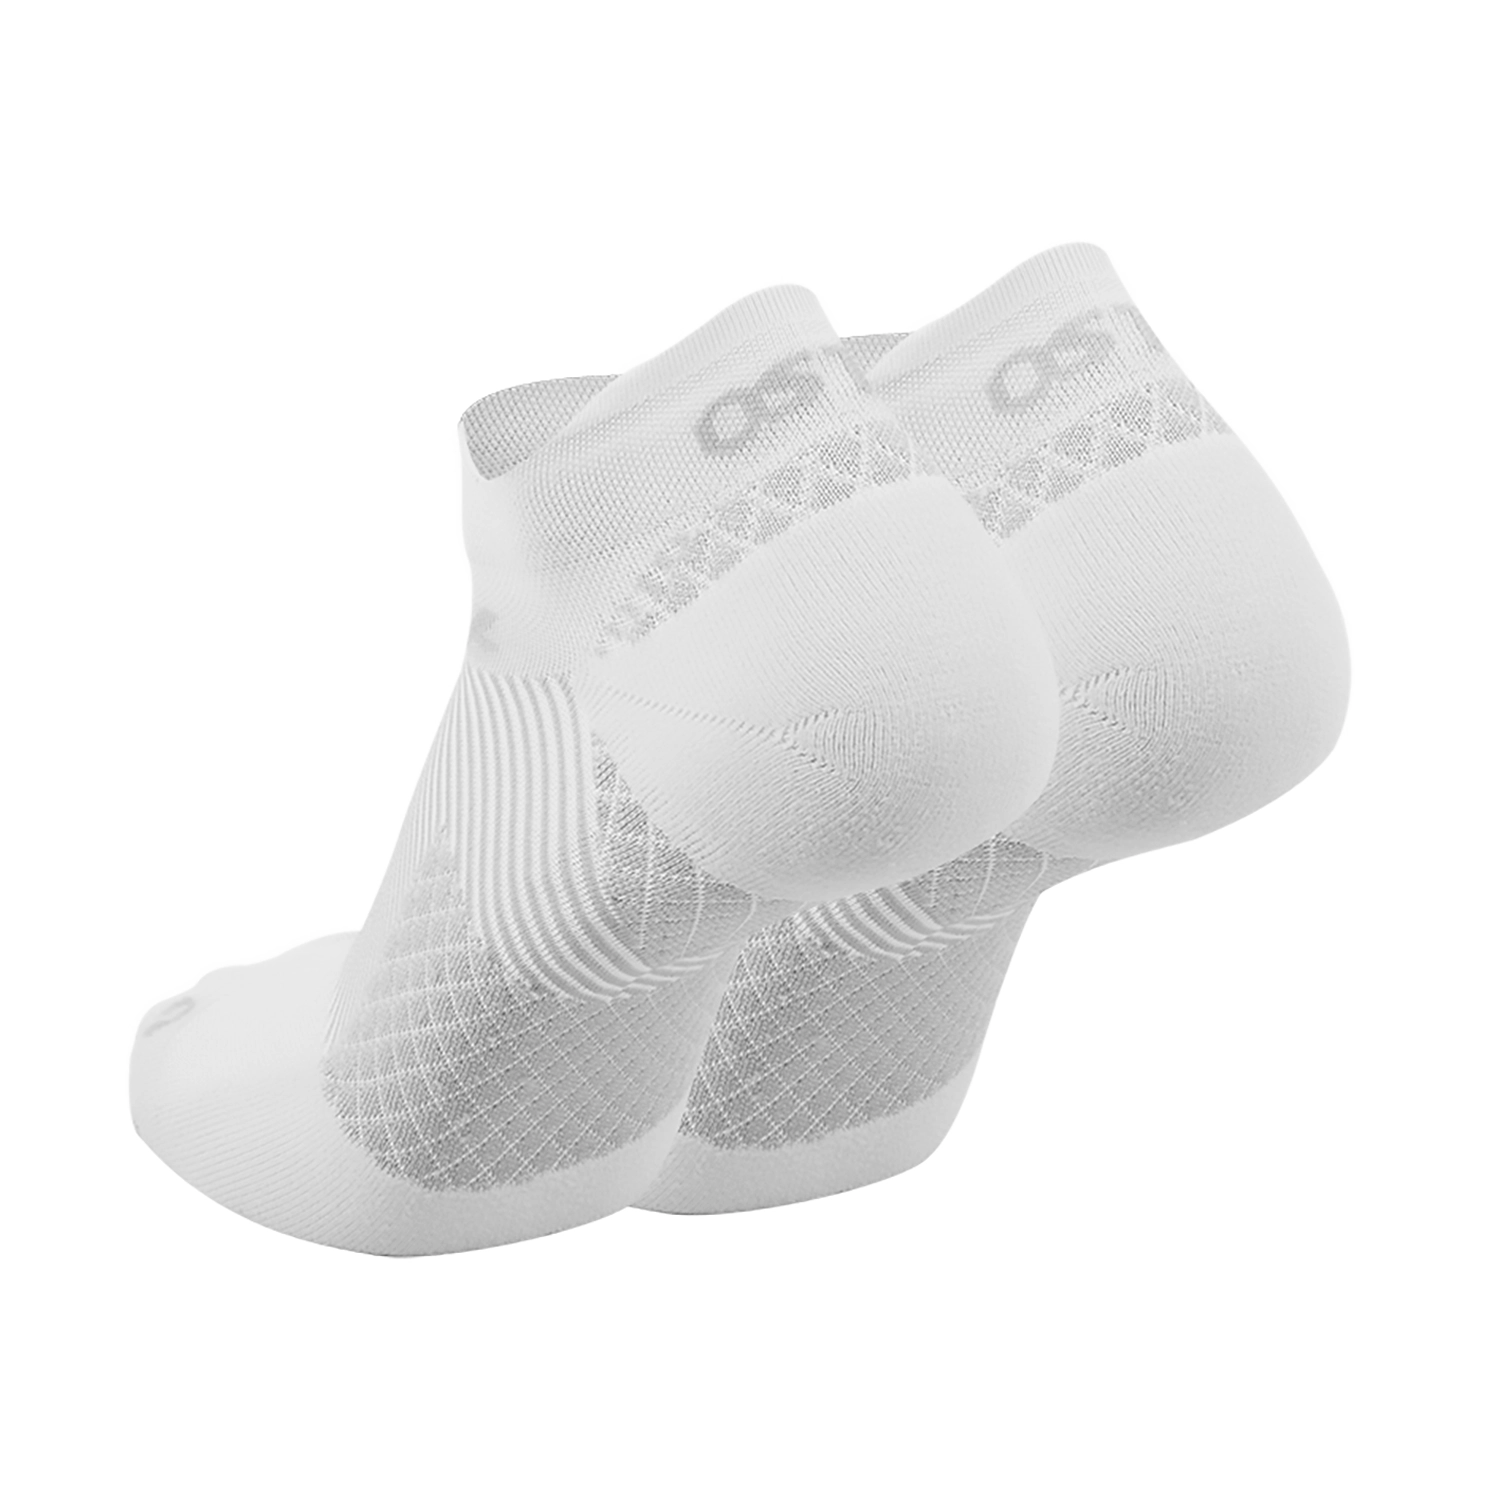 FS4 Plantar Fasciitis Compression no show length socks in white | OS1st